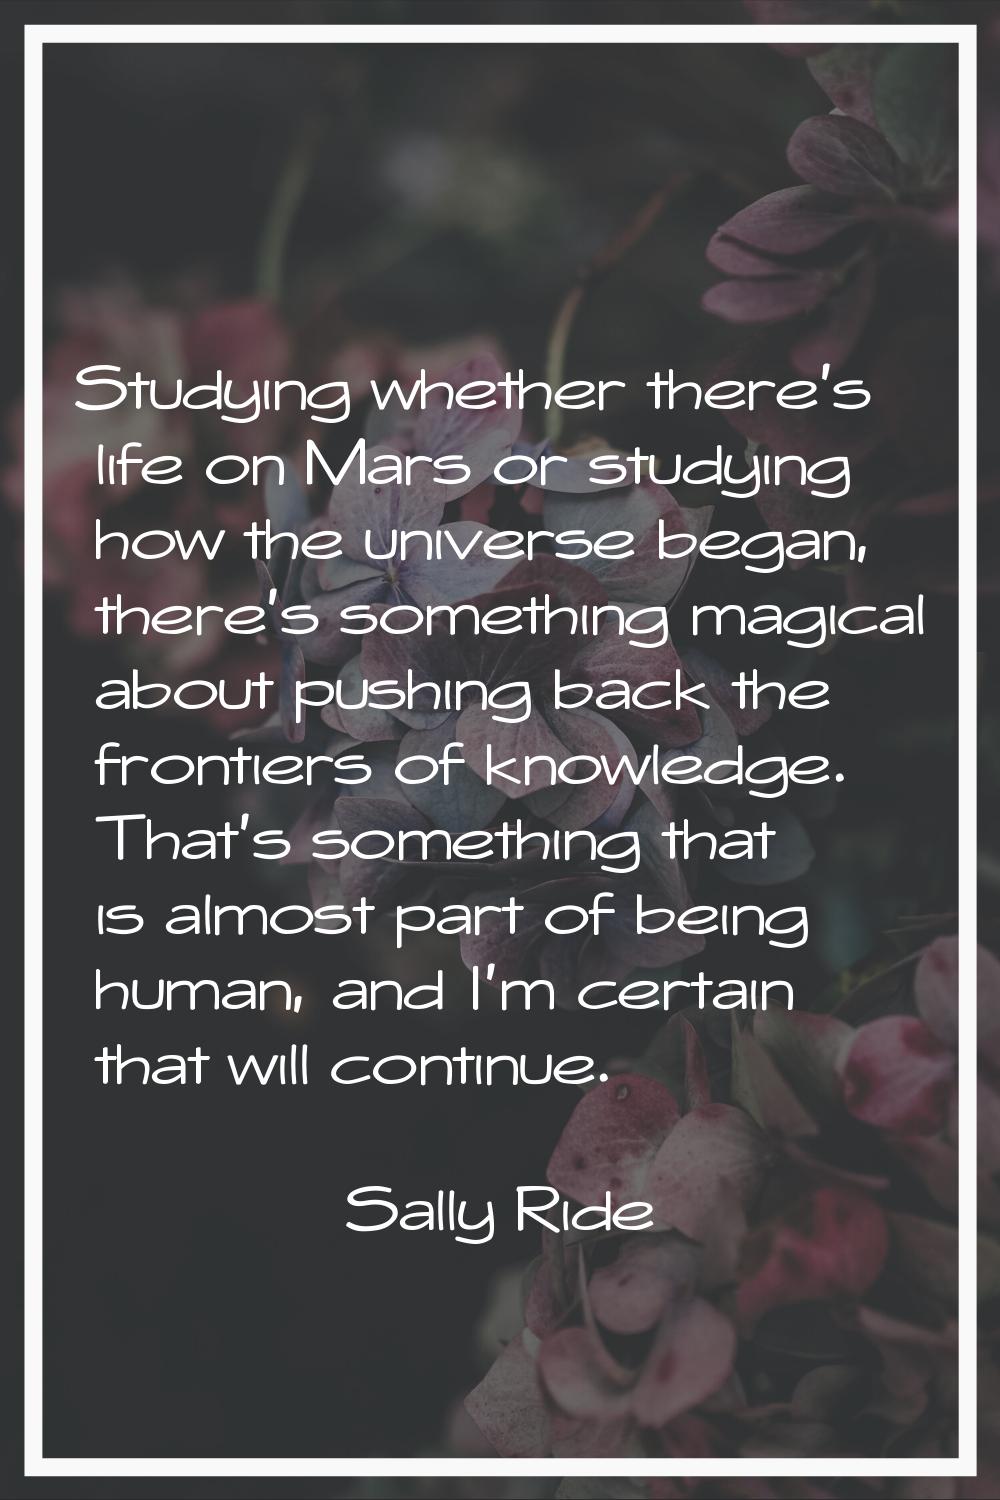 Studying whether there's life on Mars or studying how the universe began, there's something magical